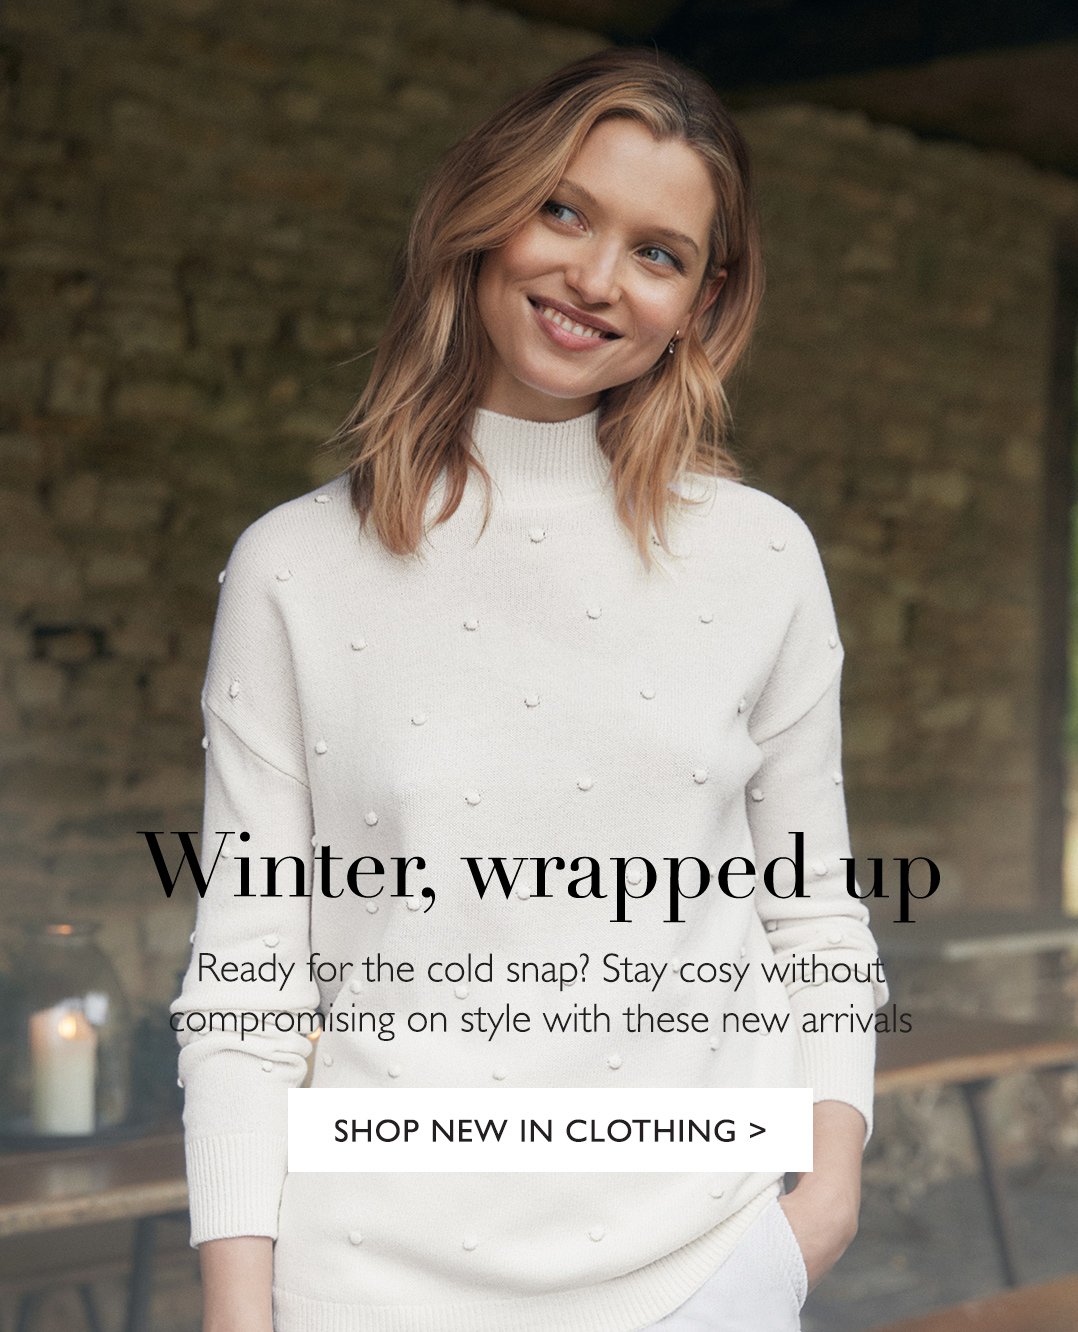 Winter, wrapped up | SHOP NEW IN CLOTHING